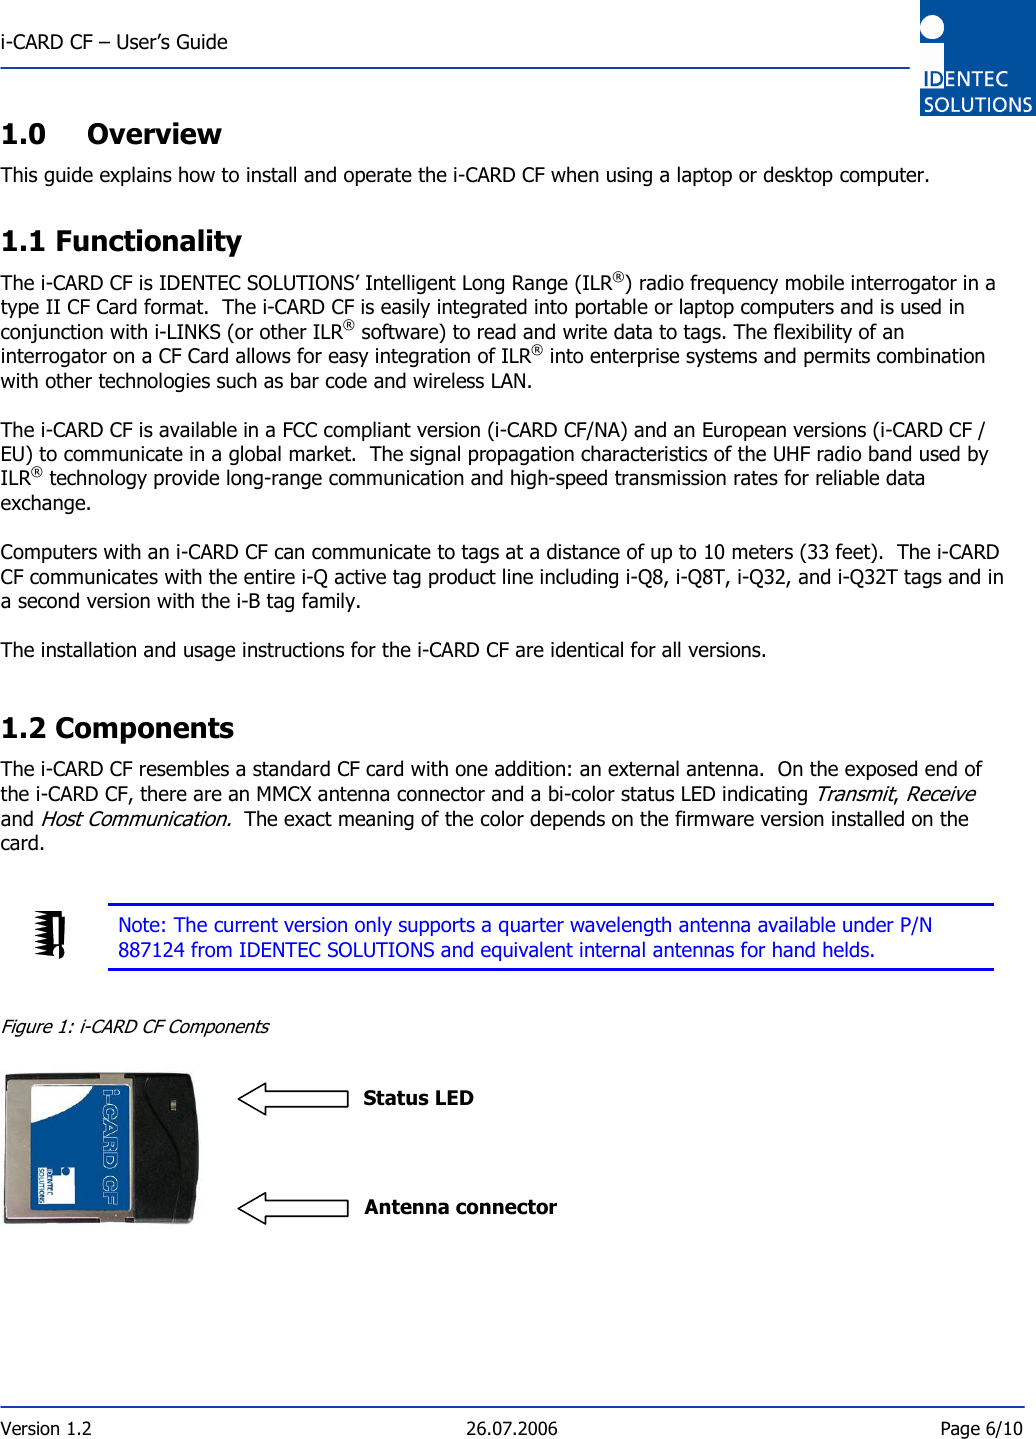  i-CARD CF – User’s Guide  Version 1.2  26.07.2006  Page 6/10    1.0 Overview This guide explains how to install and operate the i-CARD CF when using a laptop or desktop computer.  1.1 Functionality The i-CARD CF is IDENTEC SOLUTIONS’ Intelligent Long Range (ILR®) radio frequency mobile interrogator in a type II CF Card format.  The i-CARD CF is easily integrated into portable or laptop computers and is used in conjunction with i-LINKS (or other ILR® software) to read and write data to tags. The flexibility of an interrogator on a CF Card allows for easy integration of ILR® into enterprise systems and permits combination with other technologies such as bar code and wireless LAN.    The i-CARD CF is available in a FCC compliant version (i-CARD CF/NA) and an European versions (i-CARD CF / EU) to communicate in a global market.  The signal propagation characteristics of the UHF radio band used by ILR® technology provide long-range communication and high-speed transmission rates for reliable data exchange.   Computers with an i-CARD CF can communicate to tags at a distance of up to 10 meters (33 feet).  The i-CARD CF communicates with the entire i-Q active tag product line including i-Q8, i-Q8T, i-Q32, and i-Q32T tags and in a second version with the i-B tag family.   The installation and usage instructions for the i-CARD CF are identical for all versions.   1.2 Components The i-CARD CF resembles a standard CF card with one addition: an external antenna.  On the exposed end of the i-CARD CF, there are an MMCX antenna connector and a bi-color status LED indicating Transmit, Receive and Host Communication.  The exact meaning of the color depends on the firmware version installed on the card.    Note: The current version only supports a quarter wavelength antenna available under P/N 887124 from IDENTEC SOLUTIONS and equivalent internal antennas for hand helds.   Figure 1: i-CARD CF Components                             Status LED                    Antenna connector     